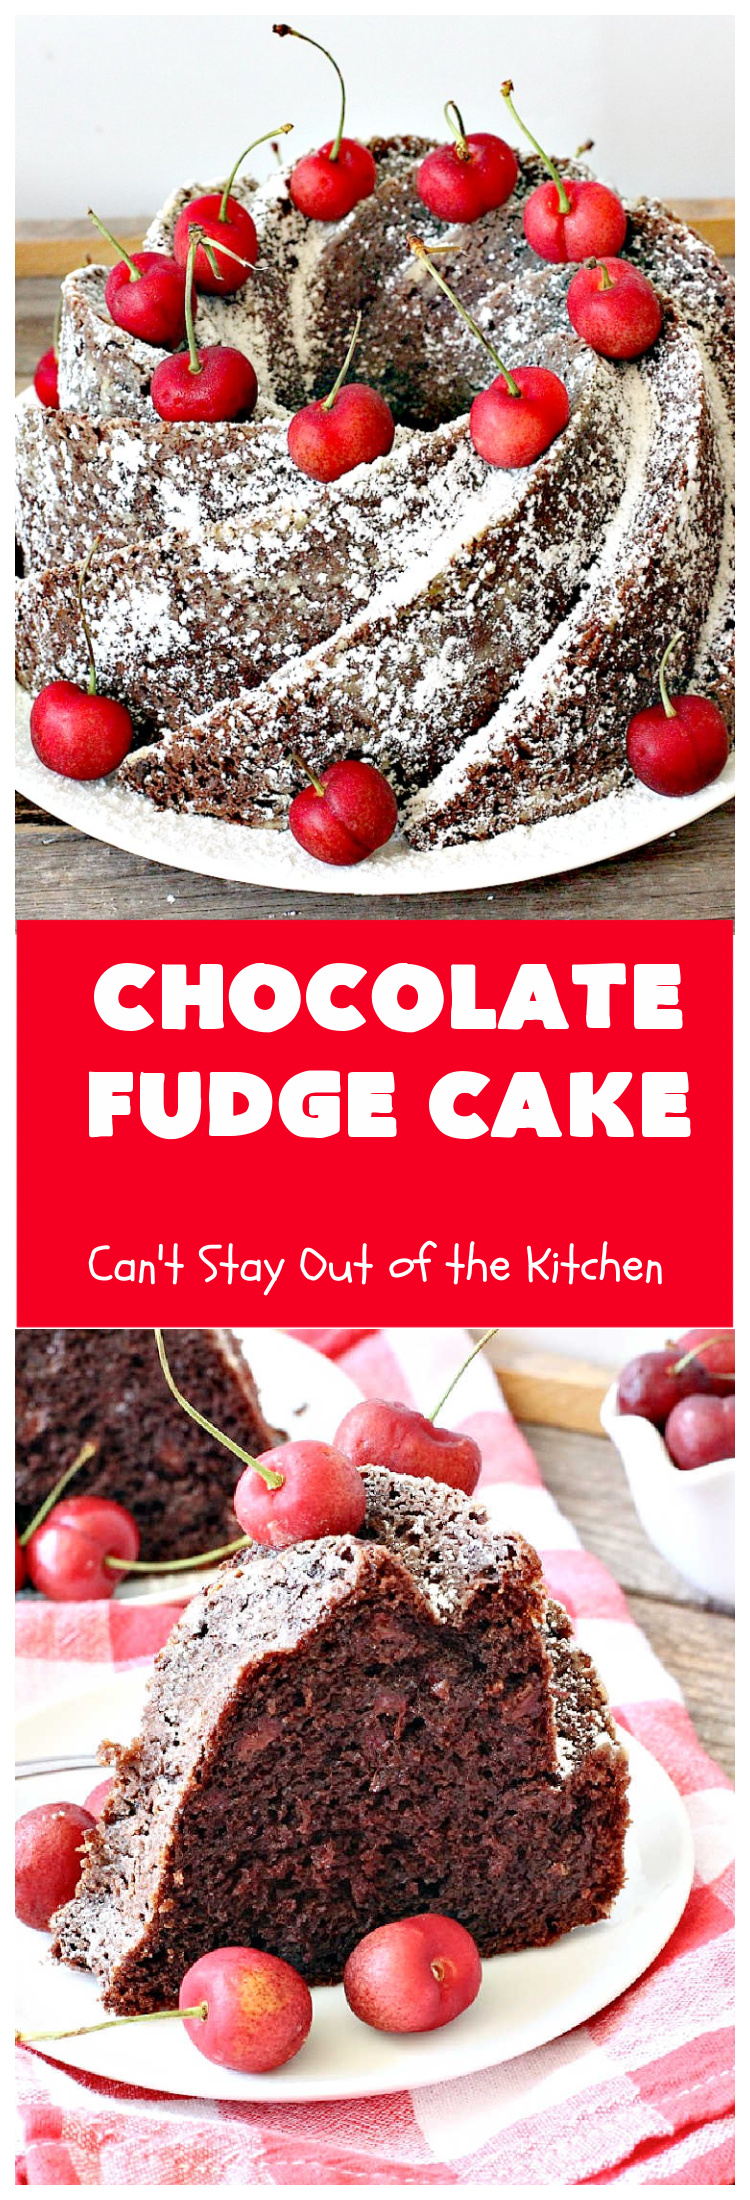 Chocolate Fudge Cake | Can't Stay Out of the Kitchen | This fabulous #chocolate #cake is incredibly fudgy since it includes a box of #ChocolatePudding and #ChocolateChips in the batter. Perfect for potlucks, backyard barbecues & #holiday parties. Quick & easy #dessert. #Holiday #HolidayDessert #ChocolateDessert #ChocolateFudgeCake #fudge